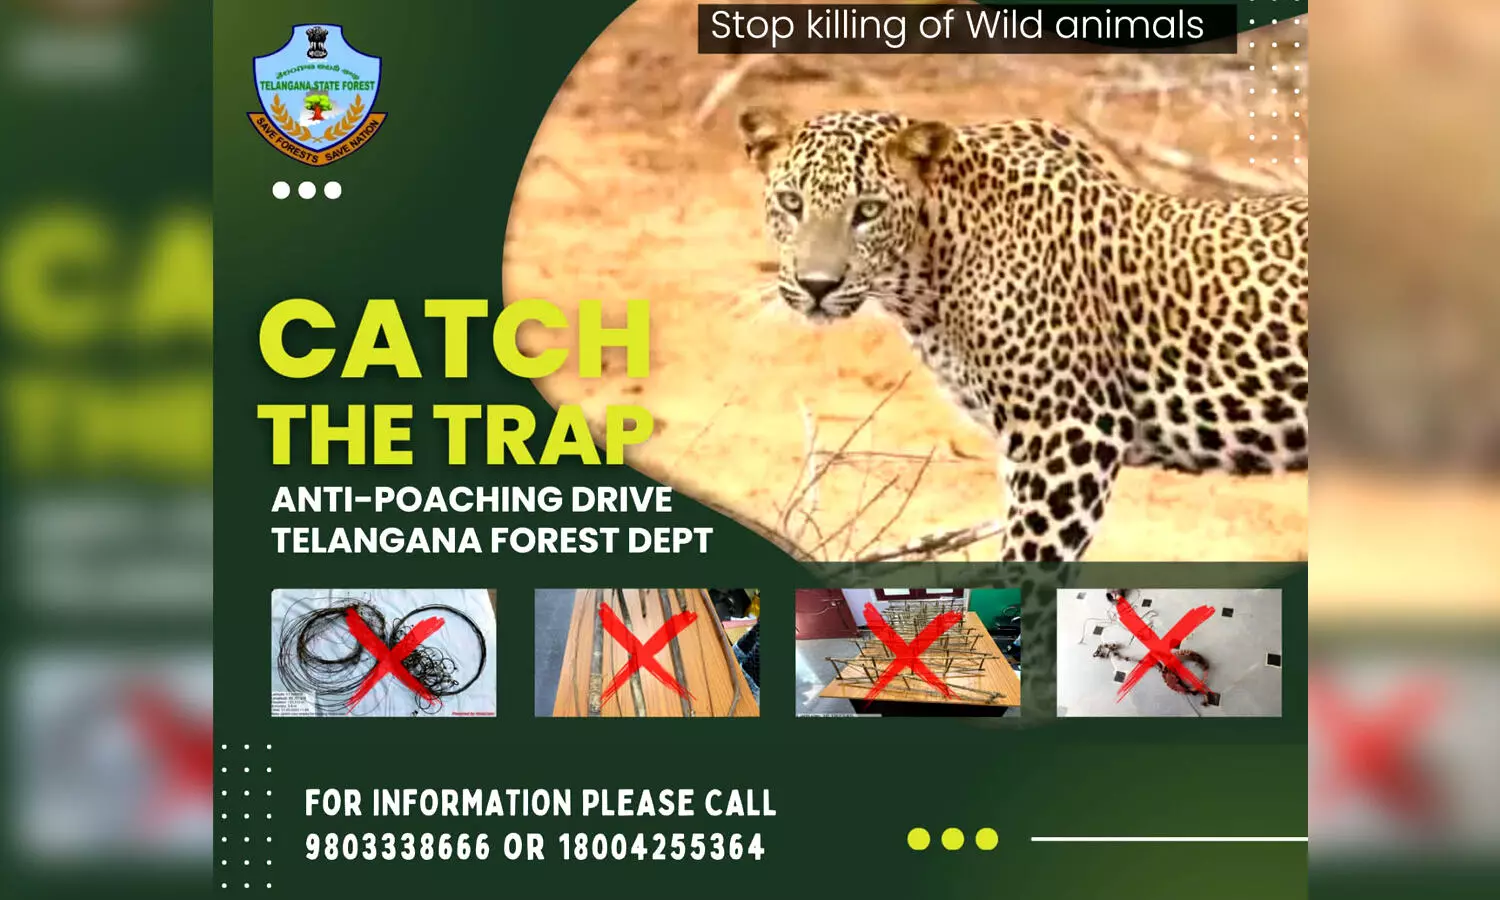 ‘Catch the trap’ campaign by Telangana Forest felt to combat poaching of wild animals